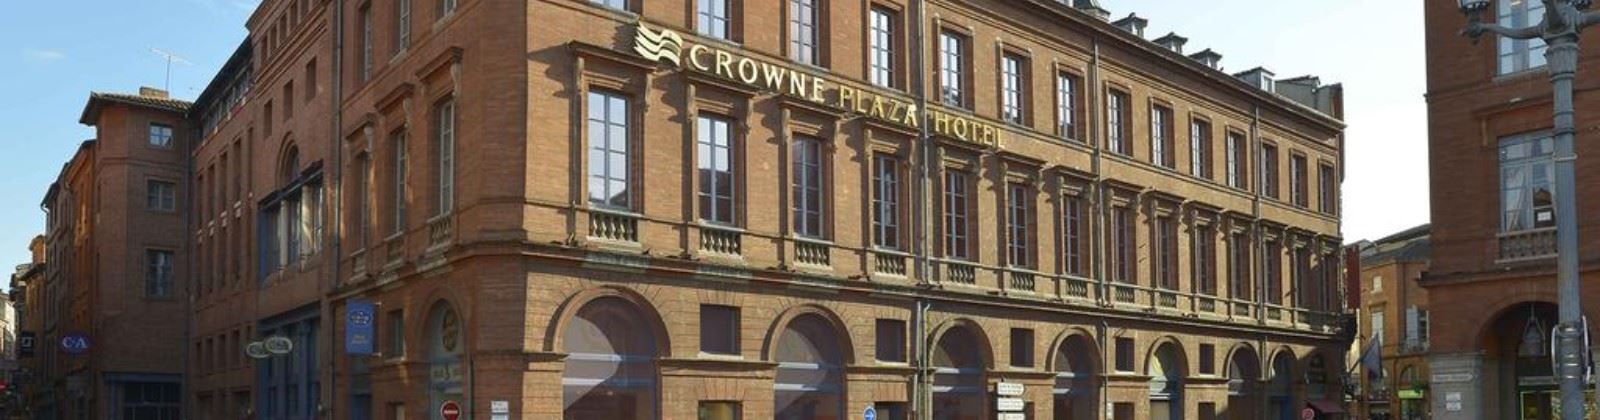 crowne plaza toulouse olevene hotel restaurant conference meeting booking 